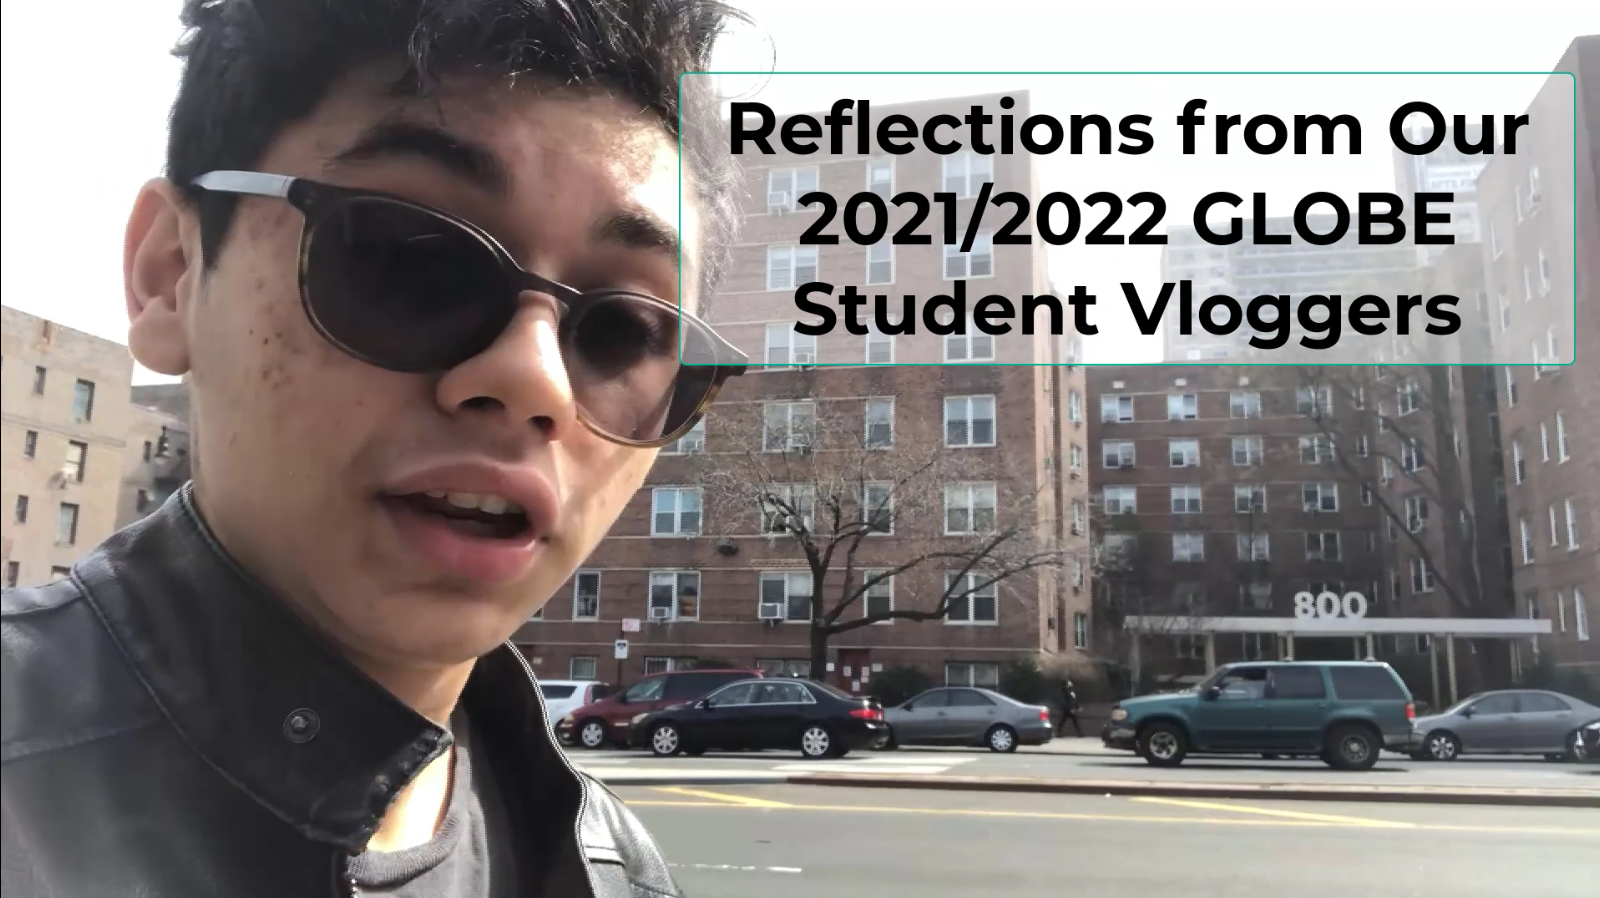 A screen shot from the video "Reflections from Our 2021/2022 GLOBE Student Vloggers"